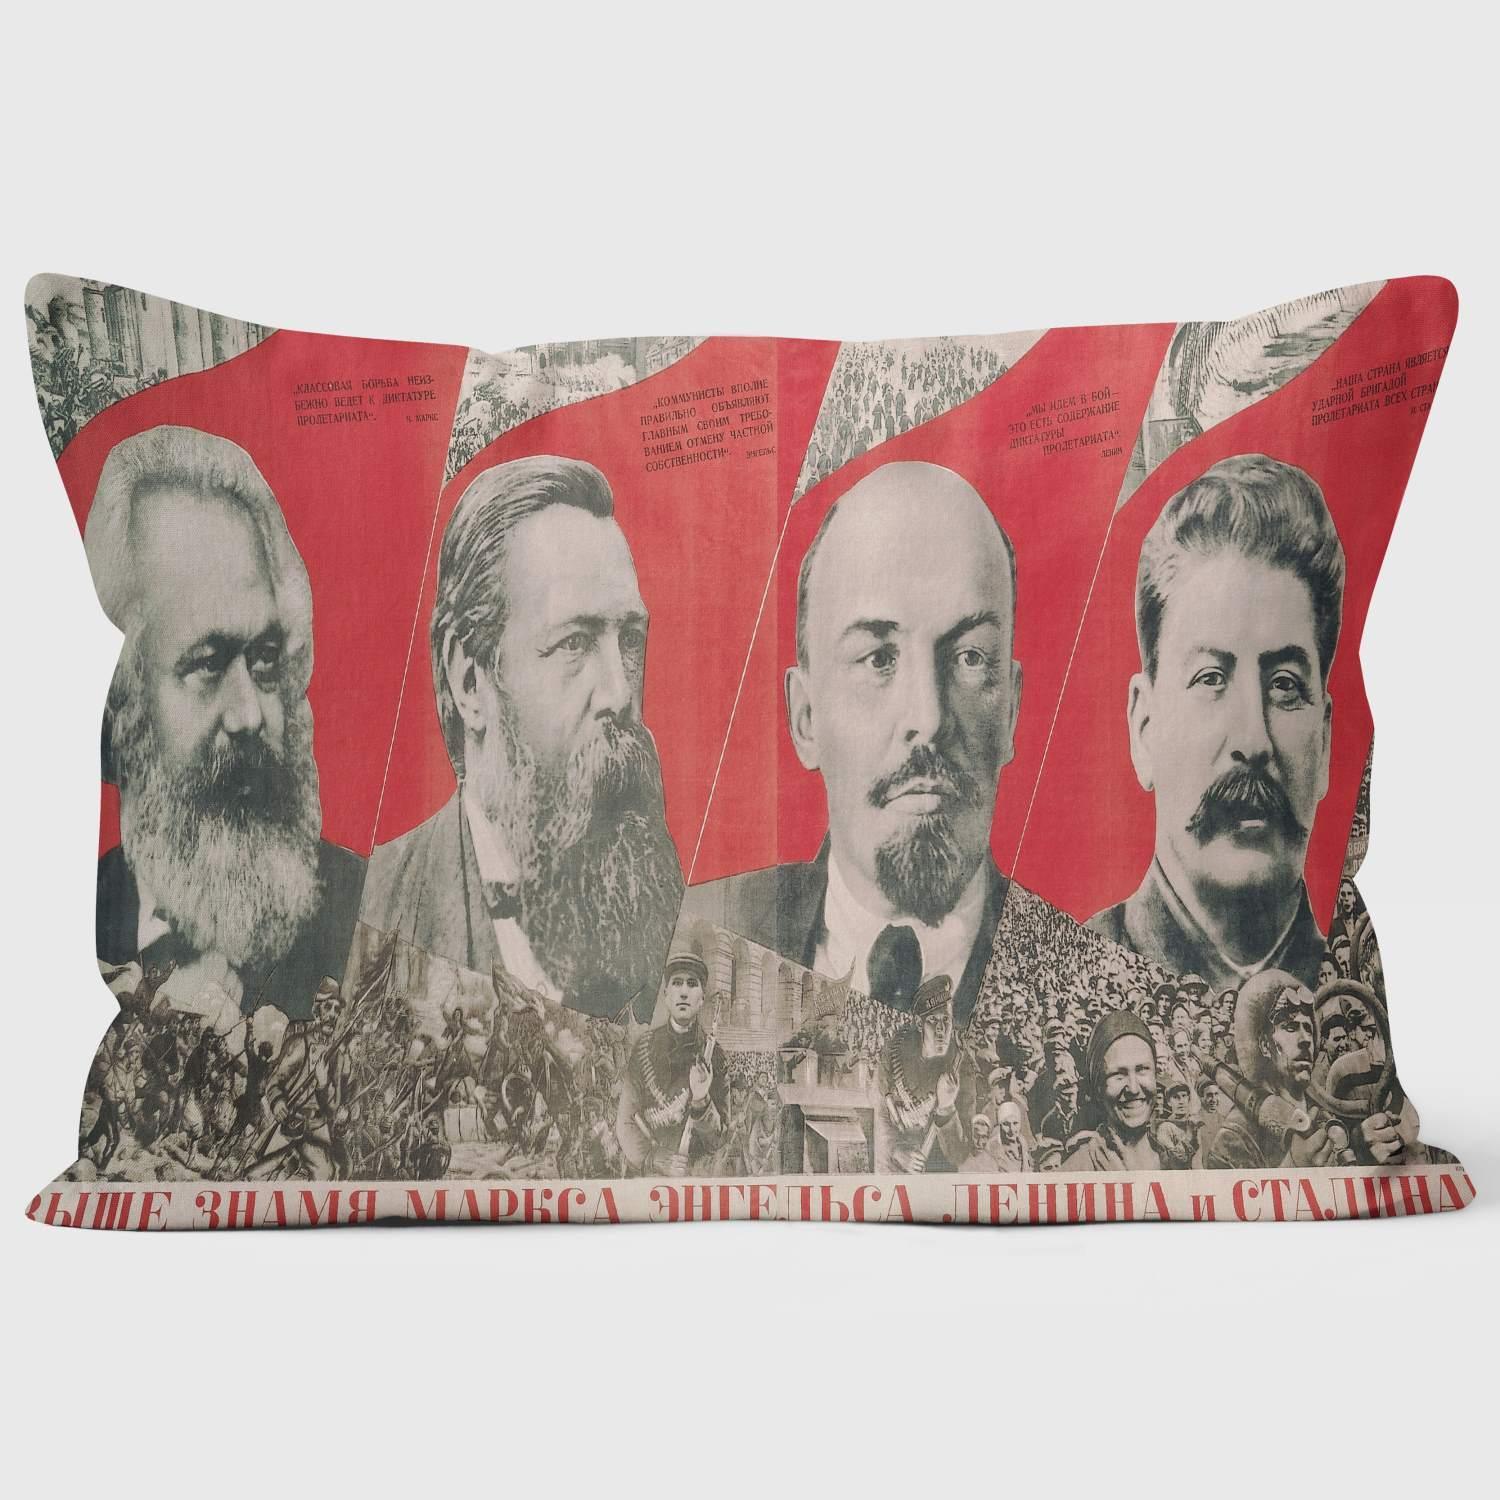 Under The Banner of Marx, Engels, Lenin and Stalin - Tate - The Russian Revolution Cushion - Handmade Cushions UK - WeLoveCushions